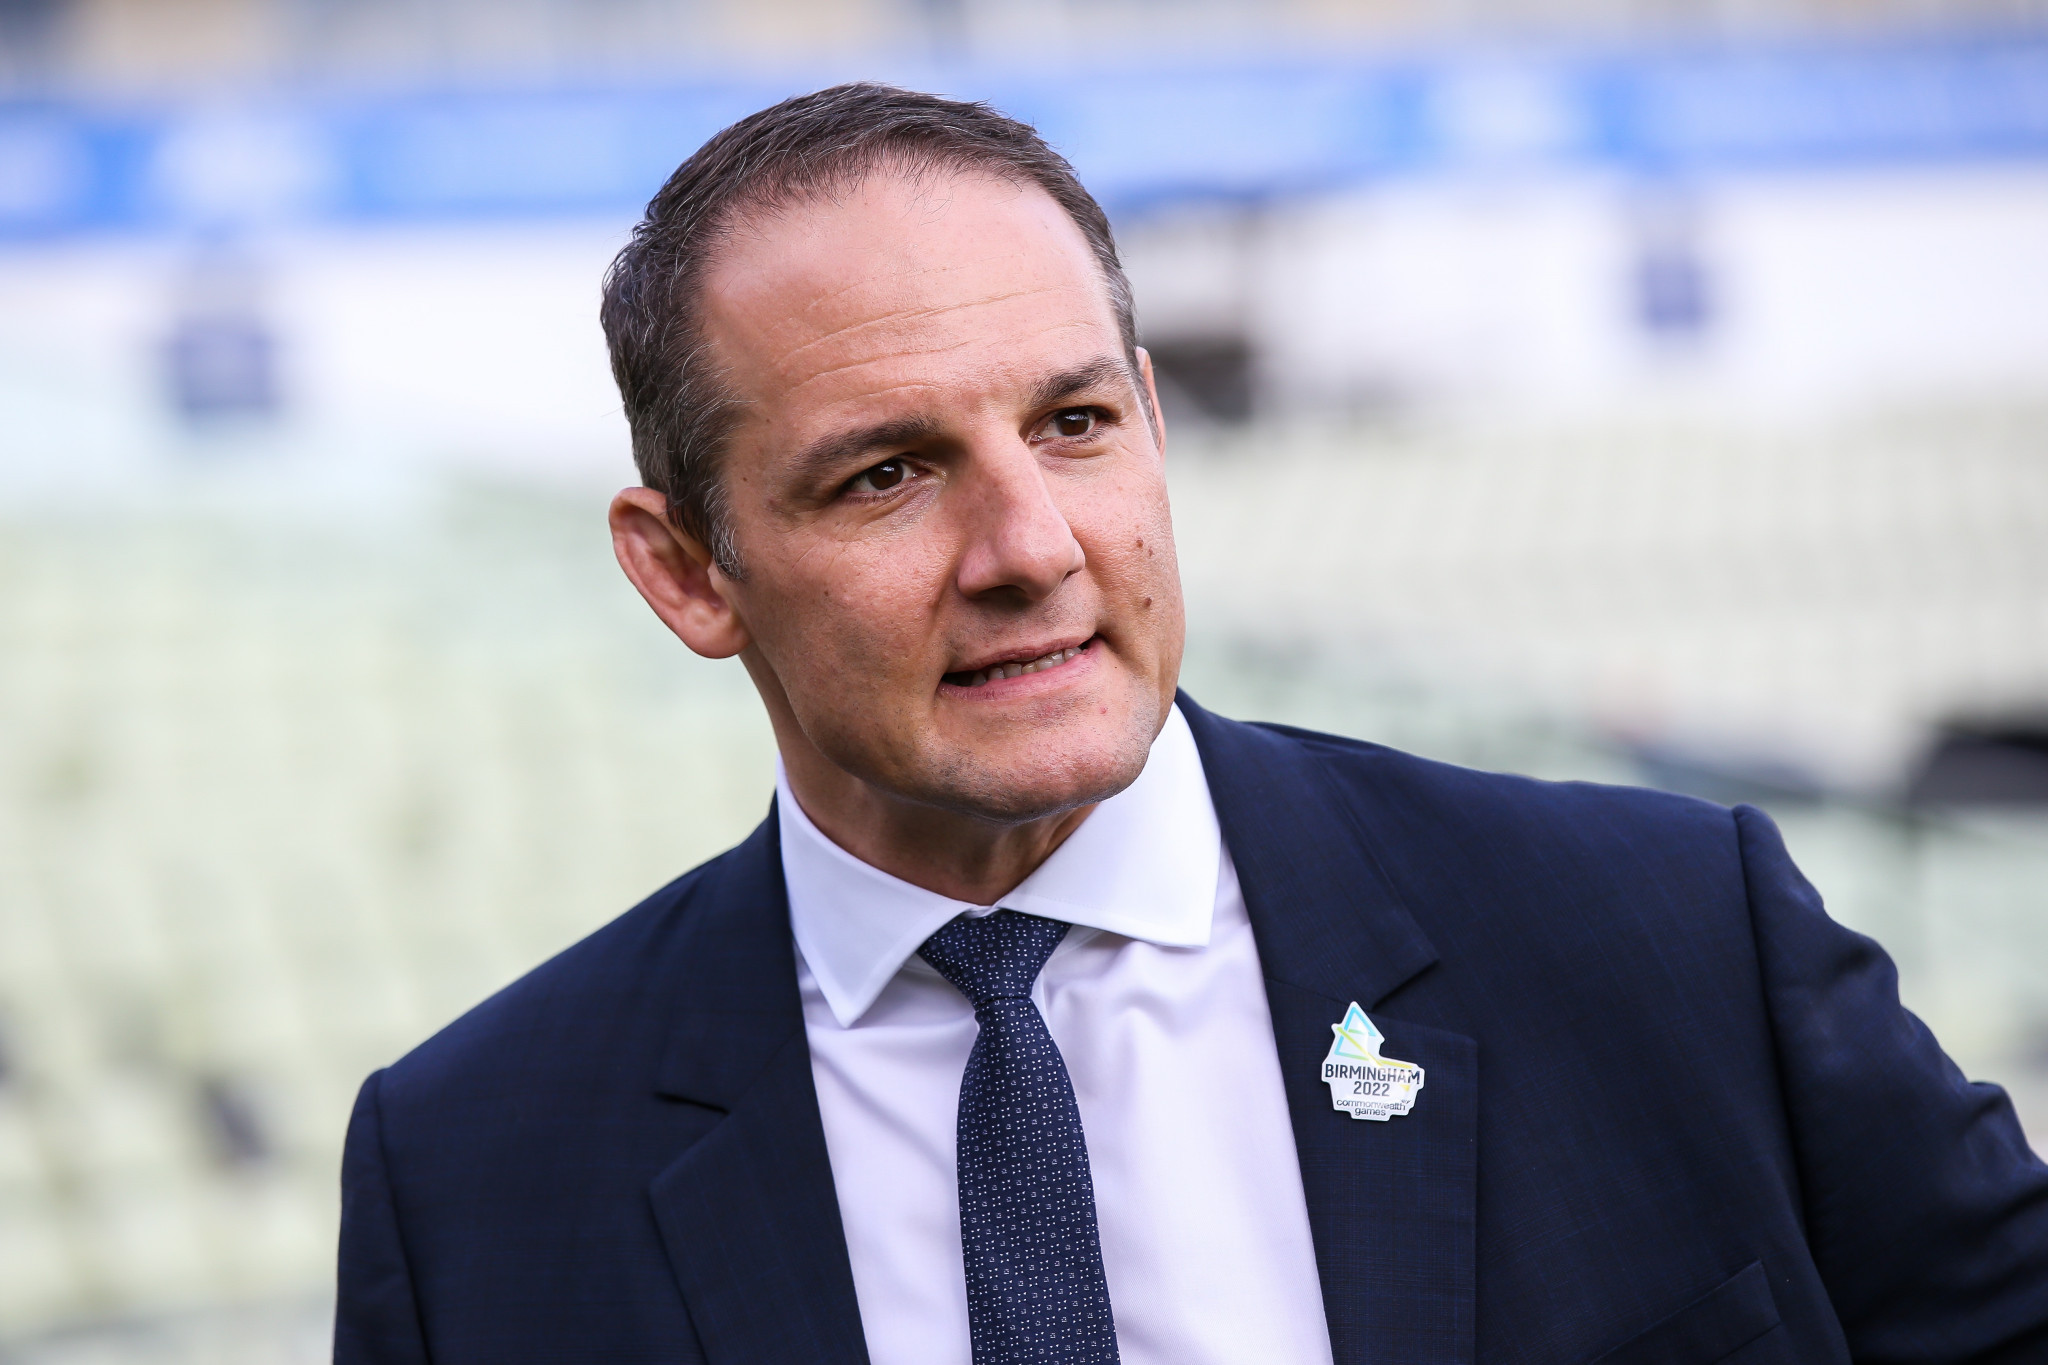 Commonwealth Games Federation chief executive David Grevemberg insists the staging of Birmingham 2022 will not be impacted by the postponement of Tokyo 2020 ©Getty Images